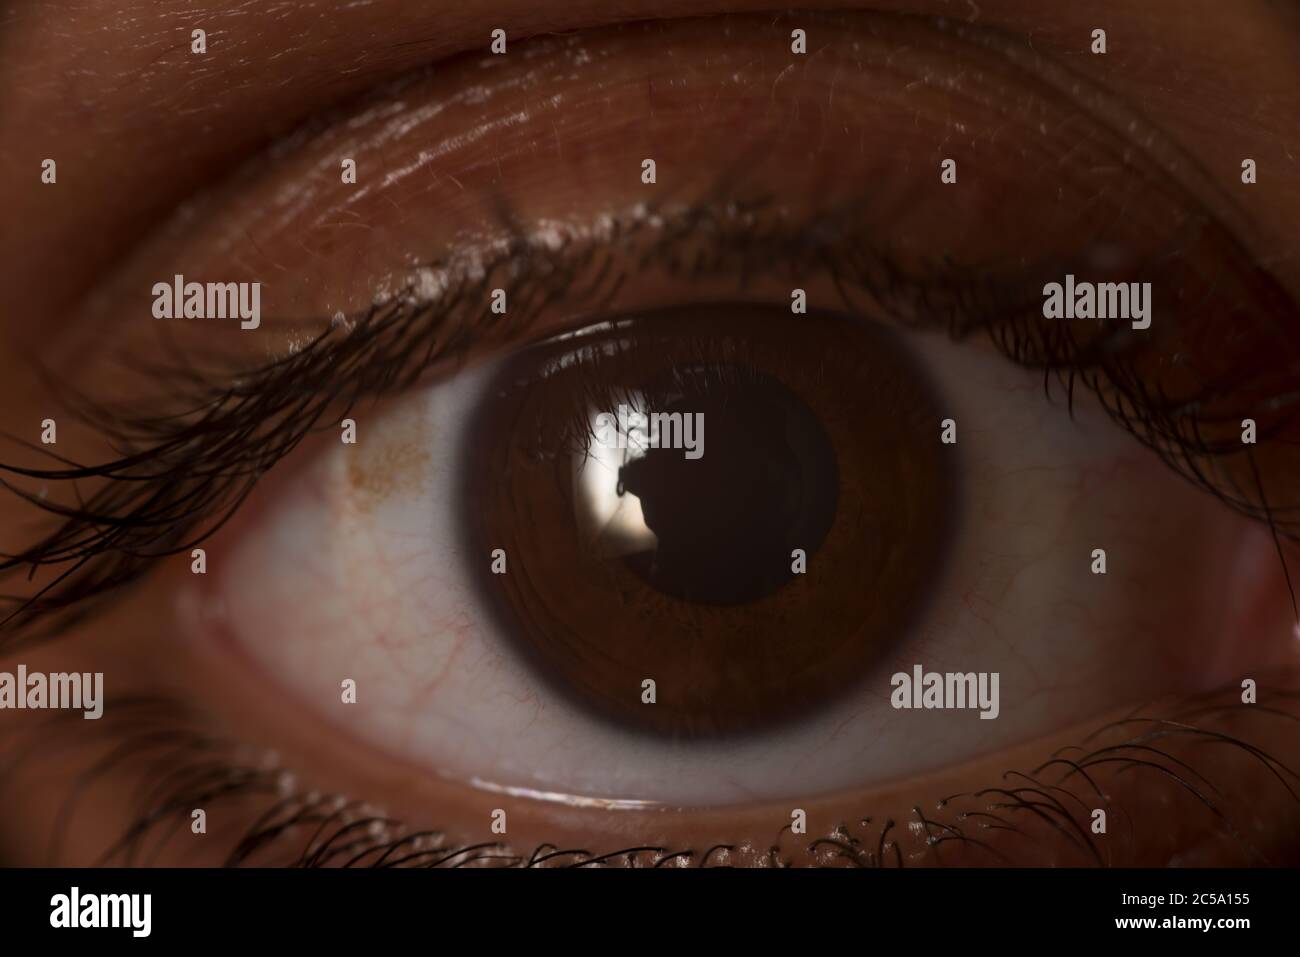 Dark brown human eye, cornea and outer layer of the eyeball, with ciliary muscle; ring of smooth muscle Stock Photo